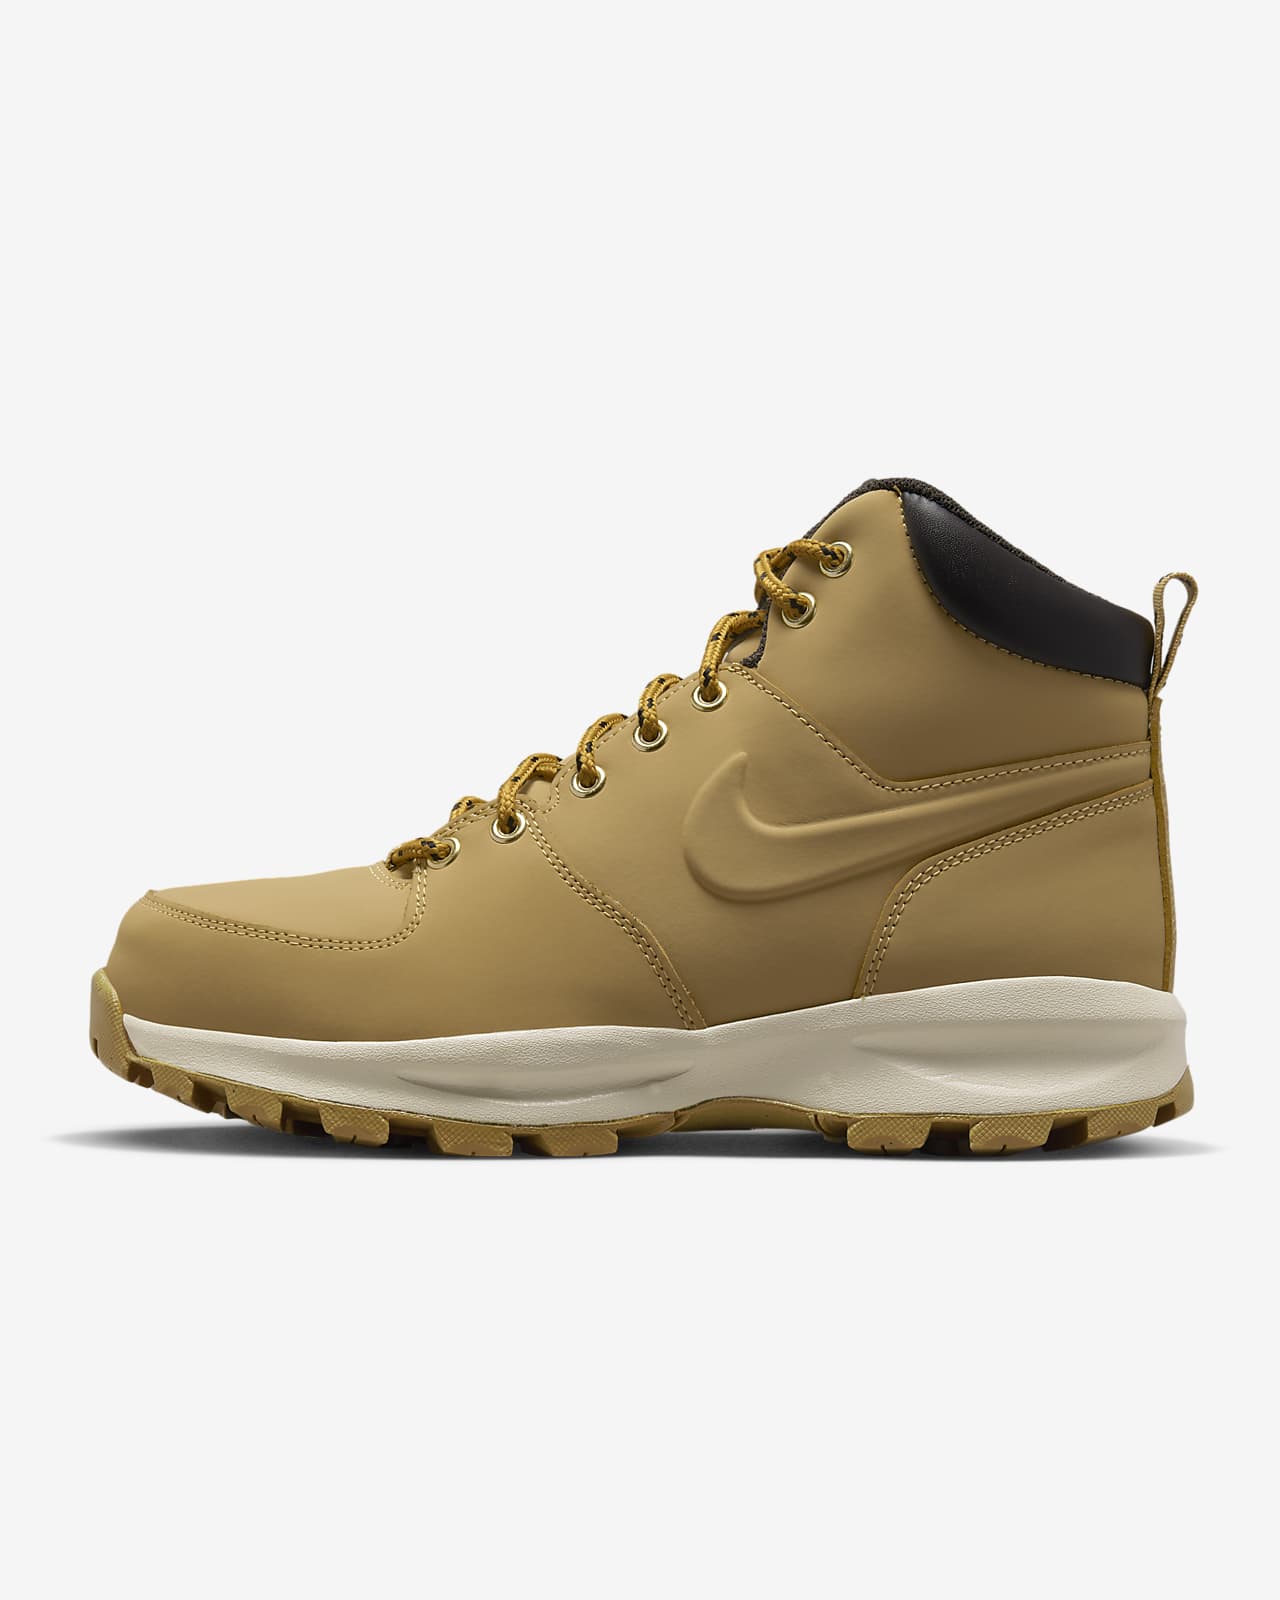 Nike Leather Men's Boot.